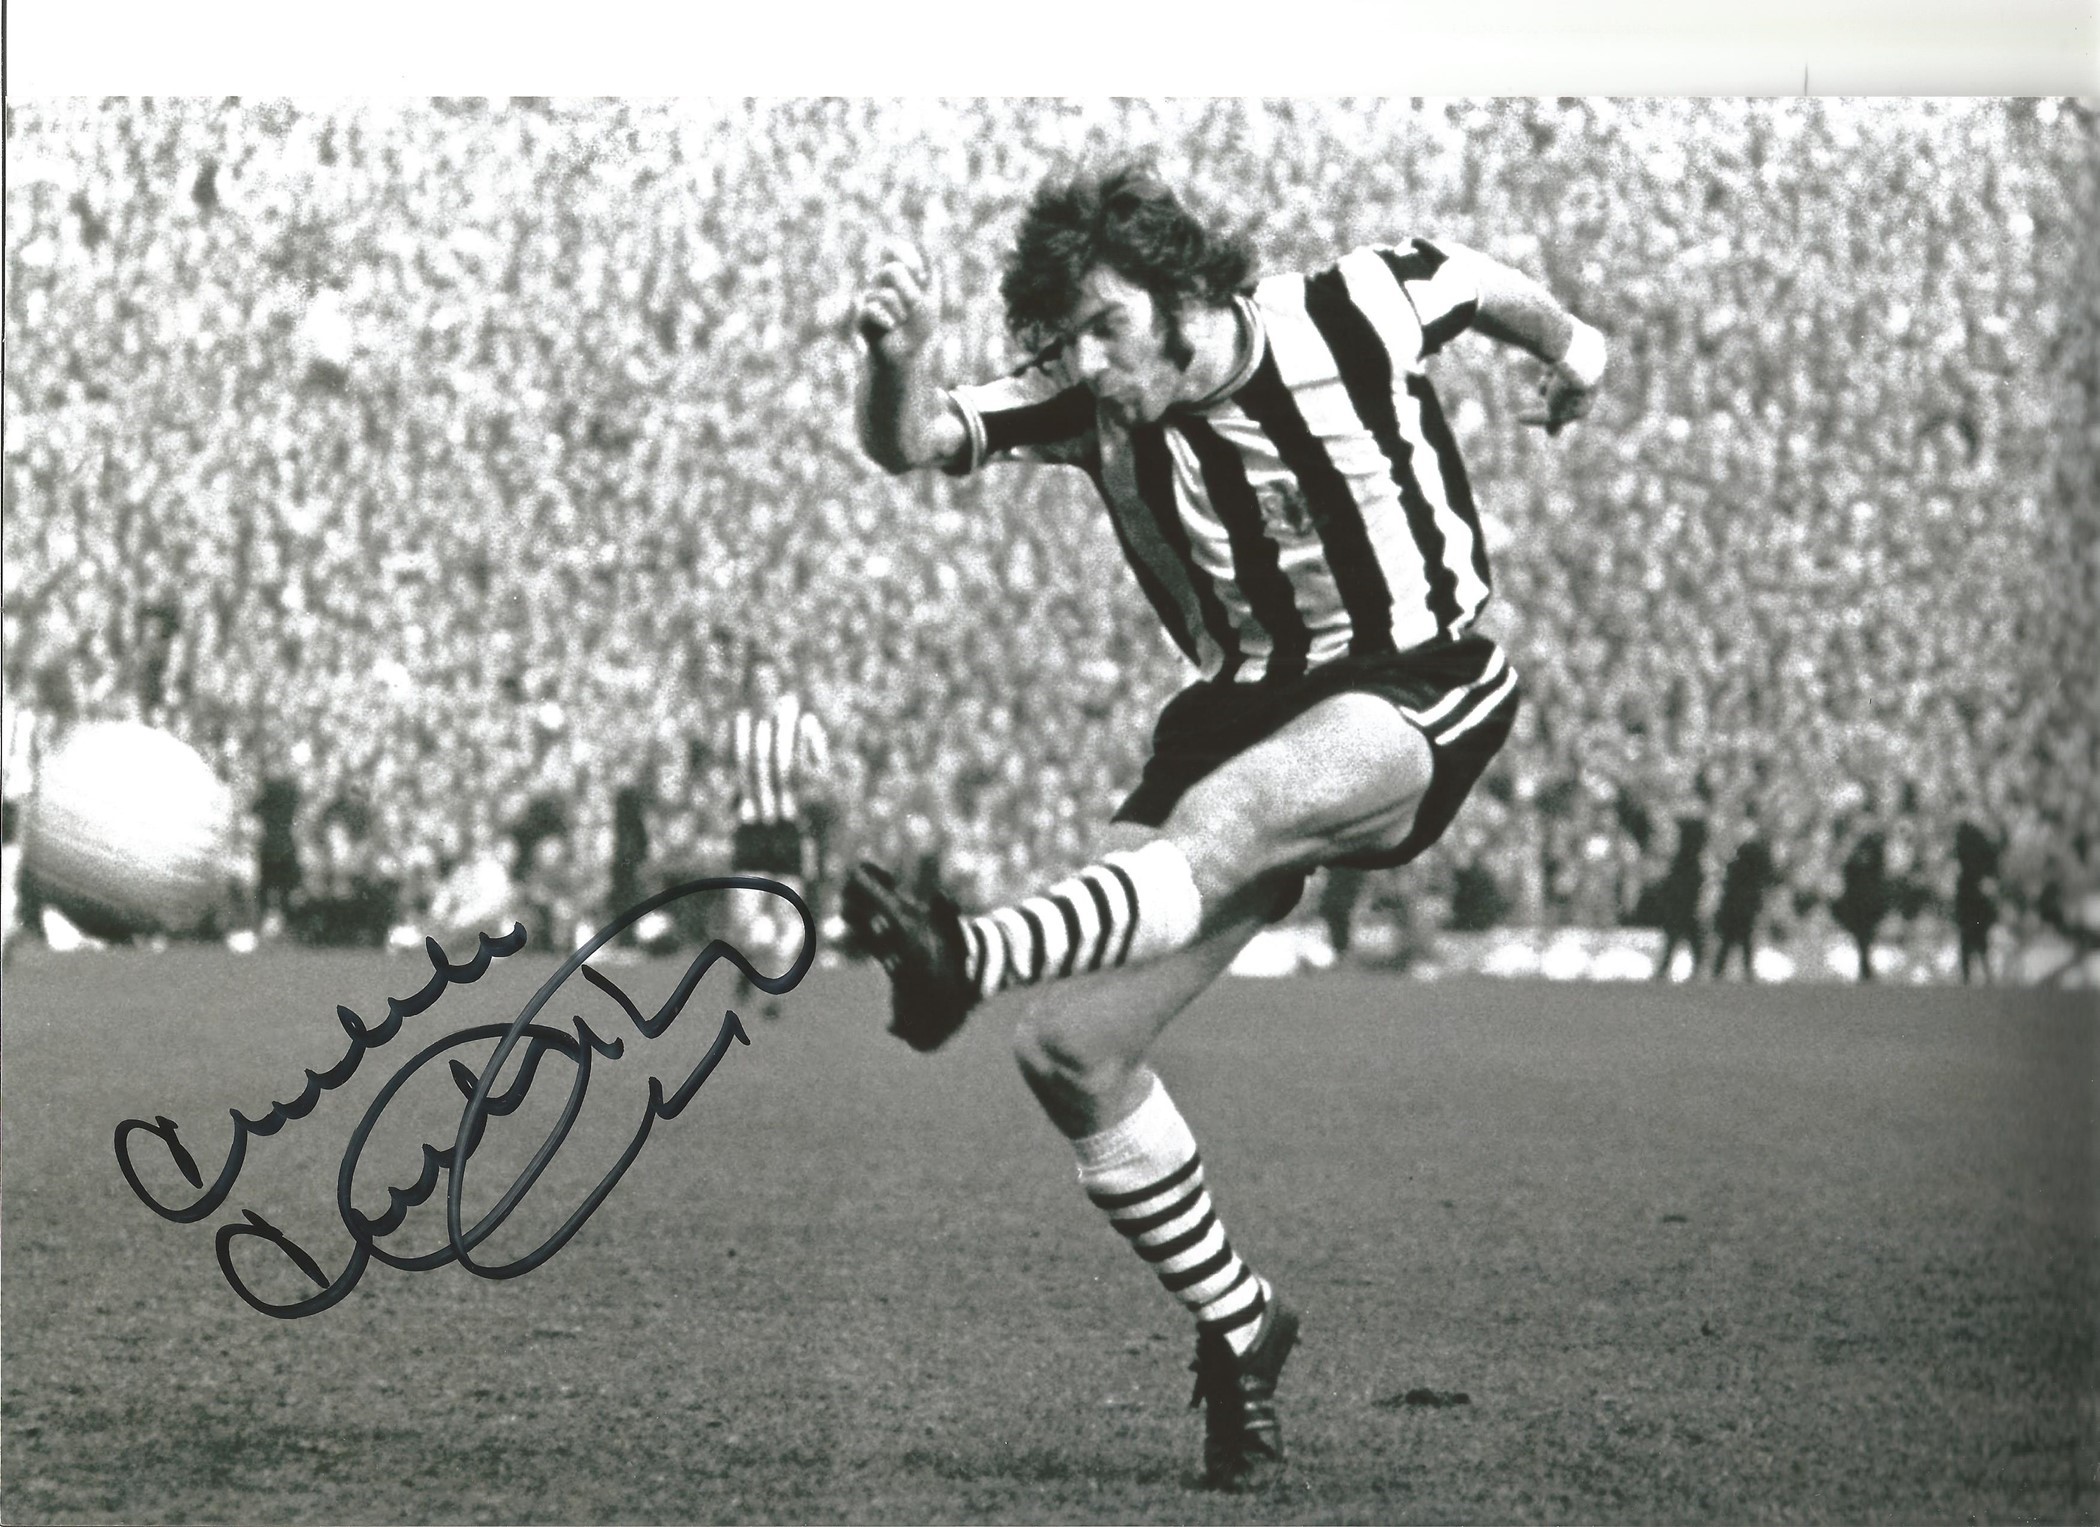 Malcolm Mcdonald Newcastle Signed 12 x 8 inch football photo. Good condition. All autographs come